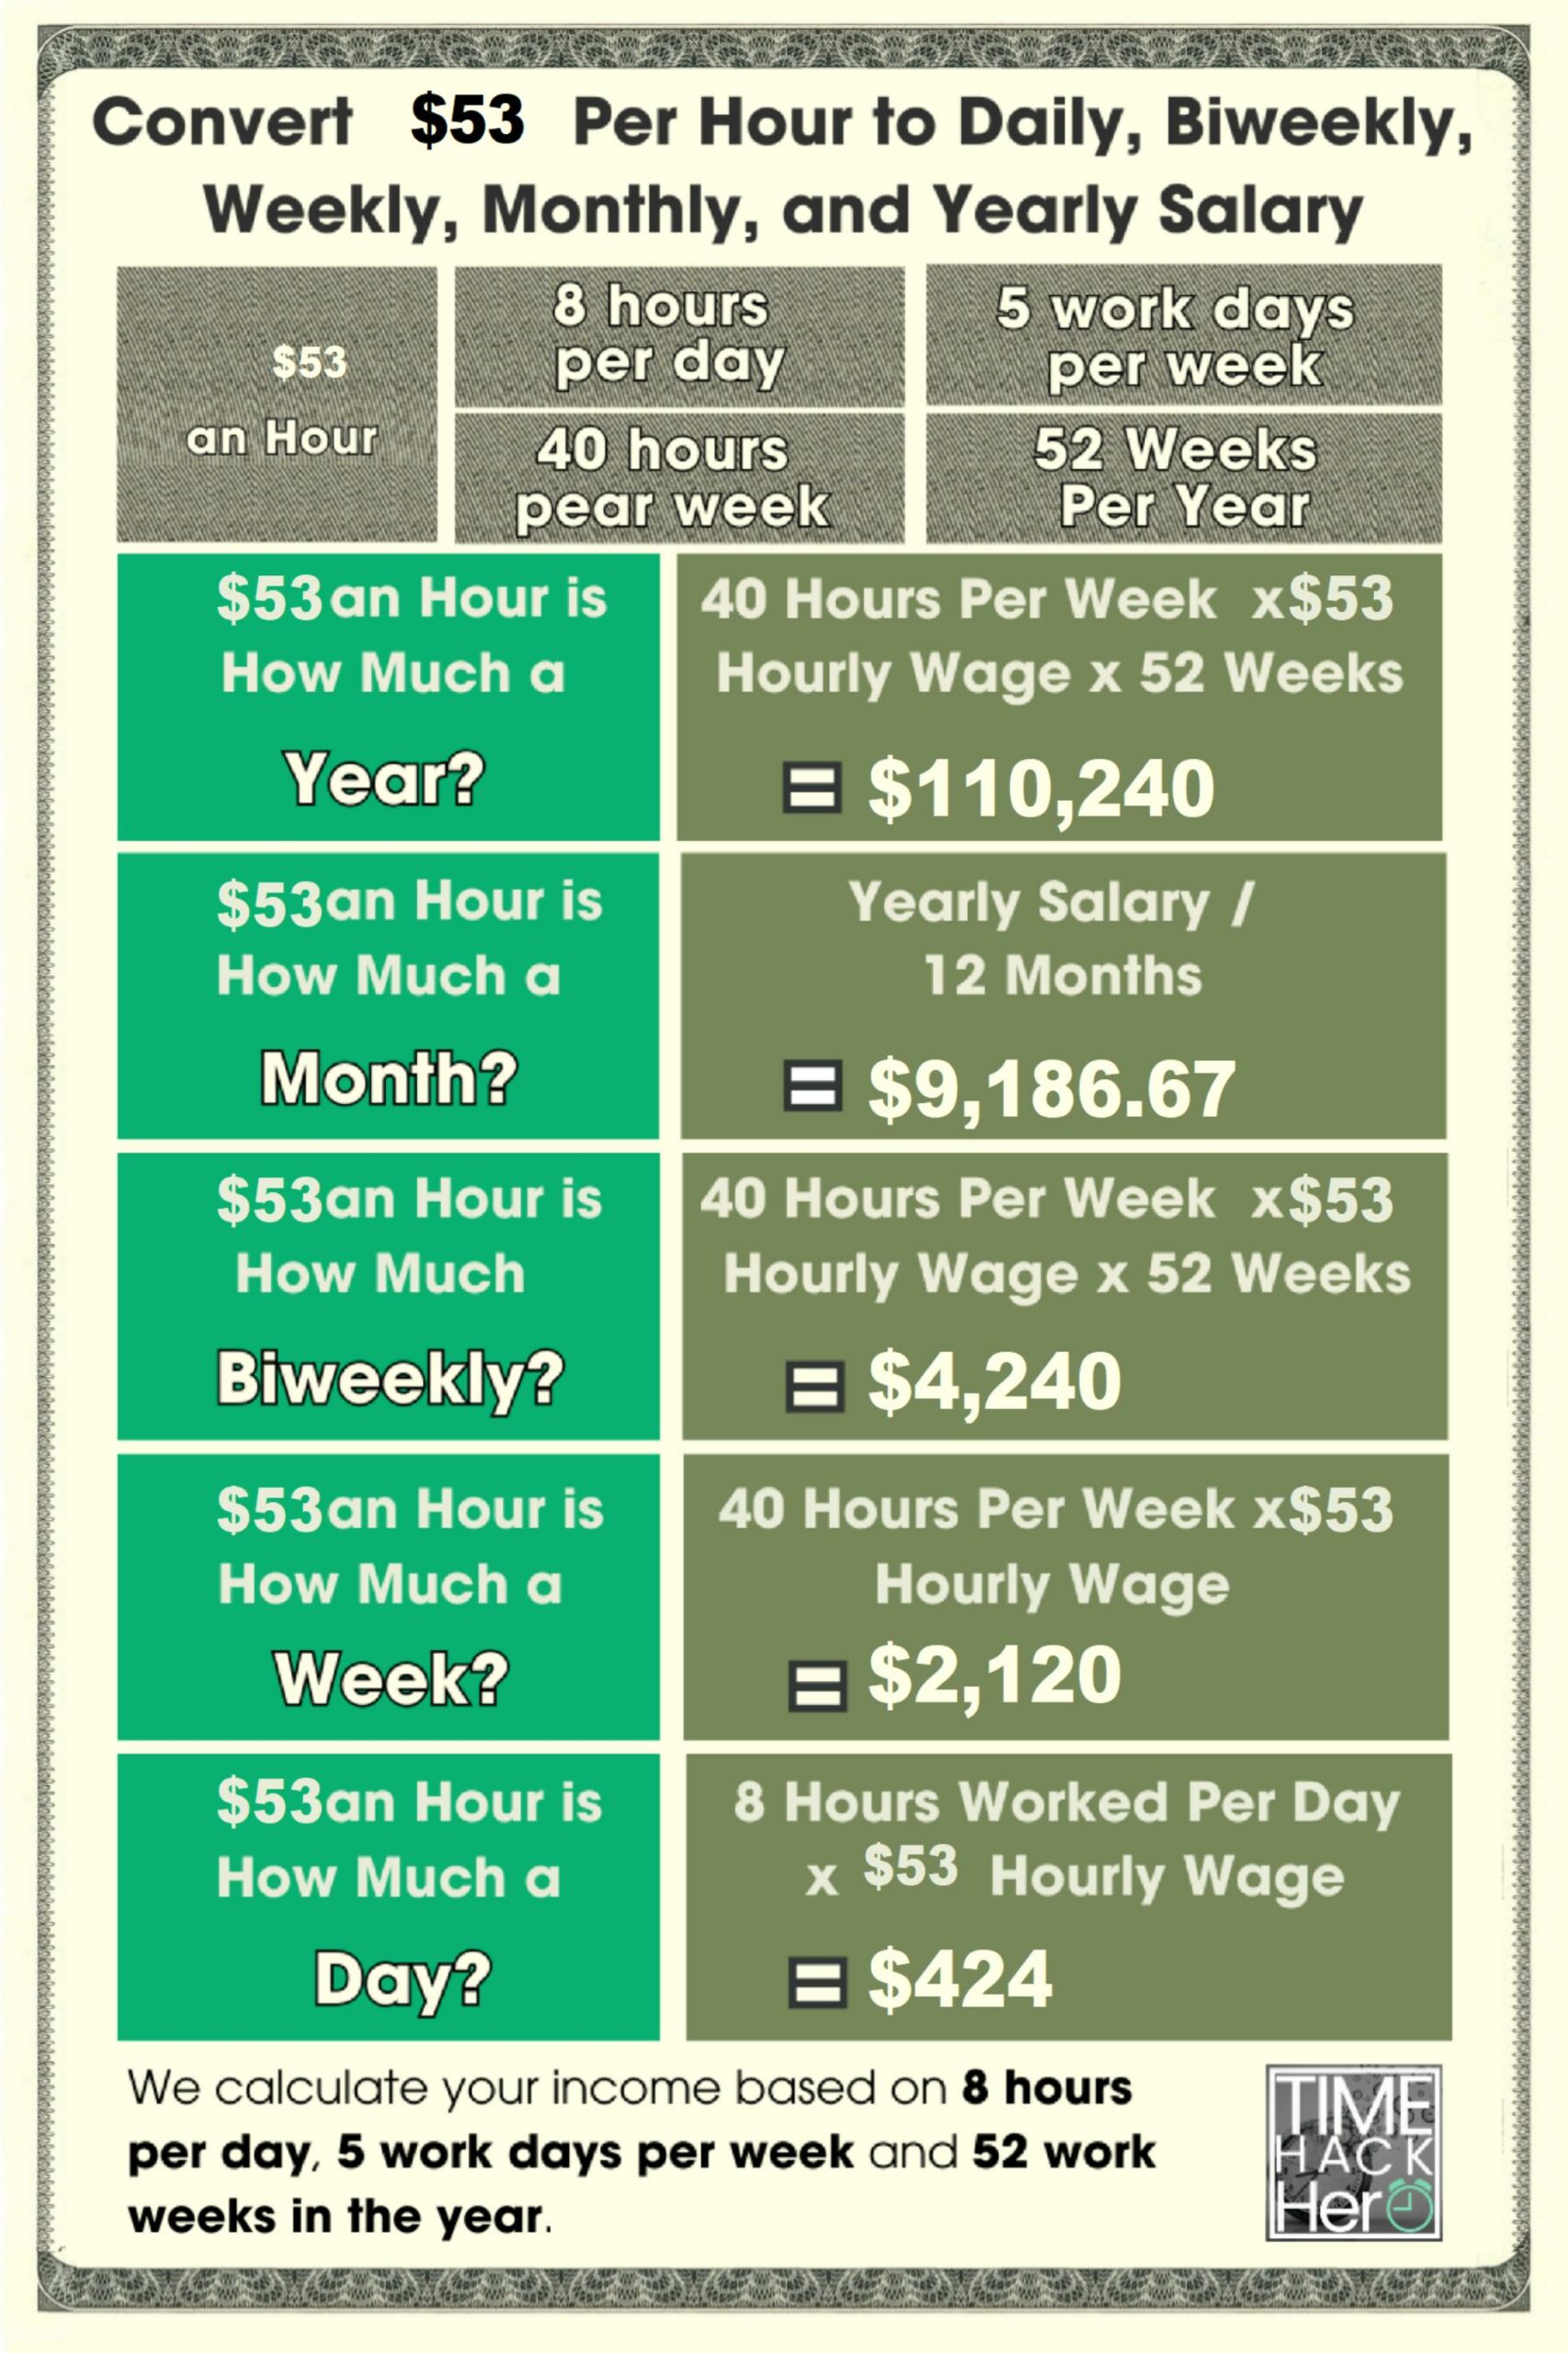 Convert $53 Per Hour to Weekly, Monthly, and Yearly Salary